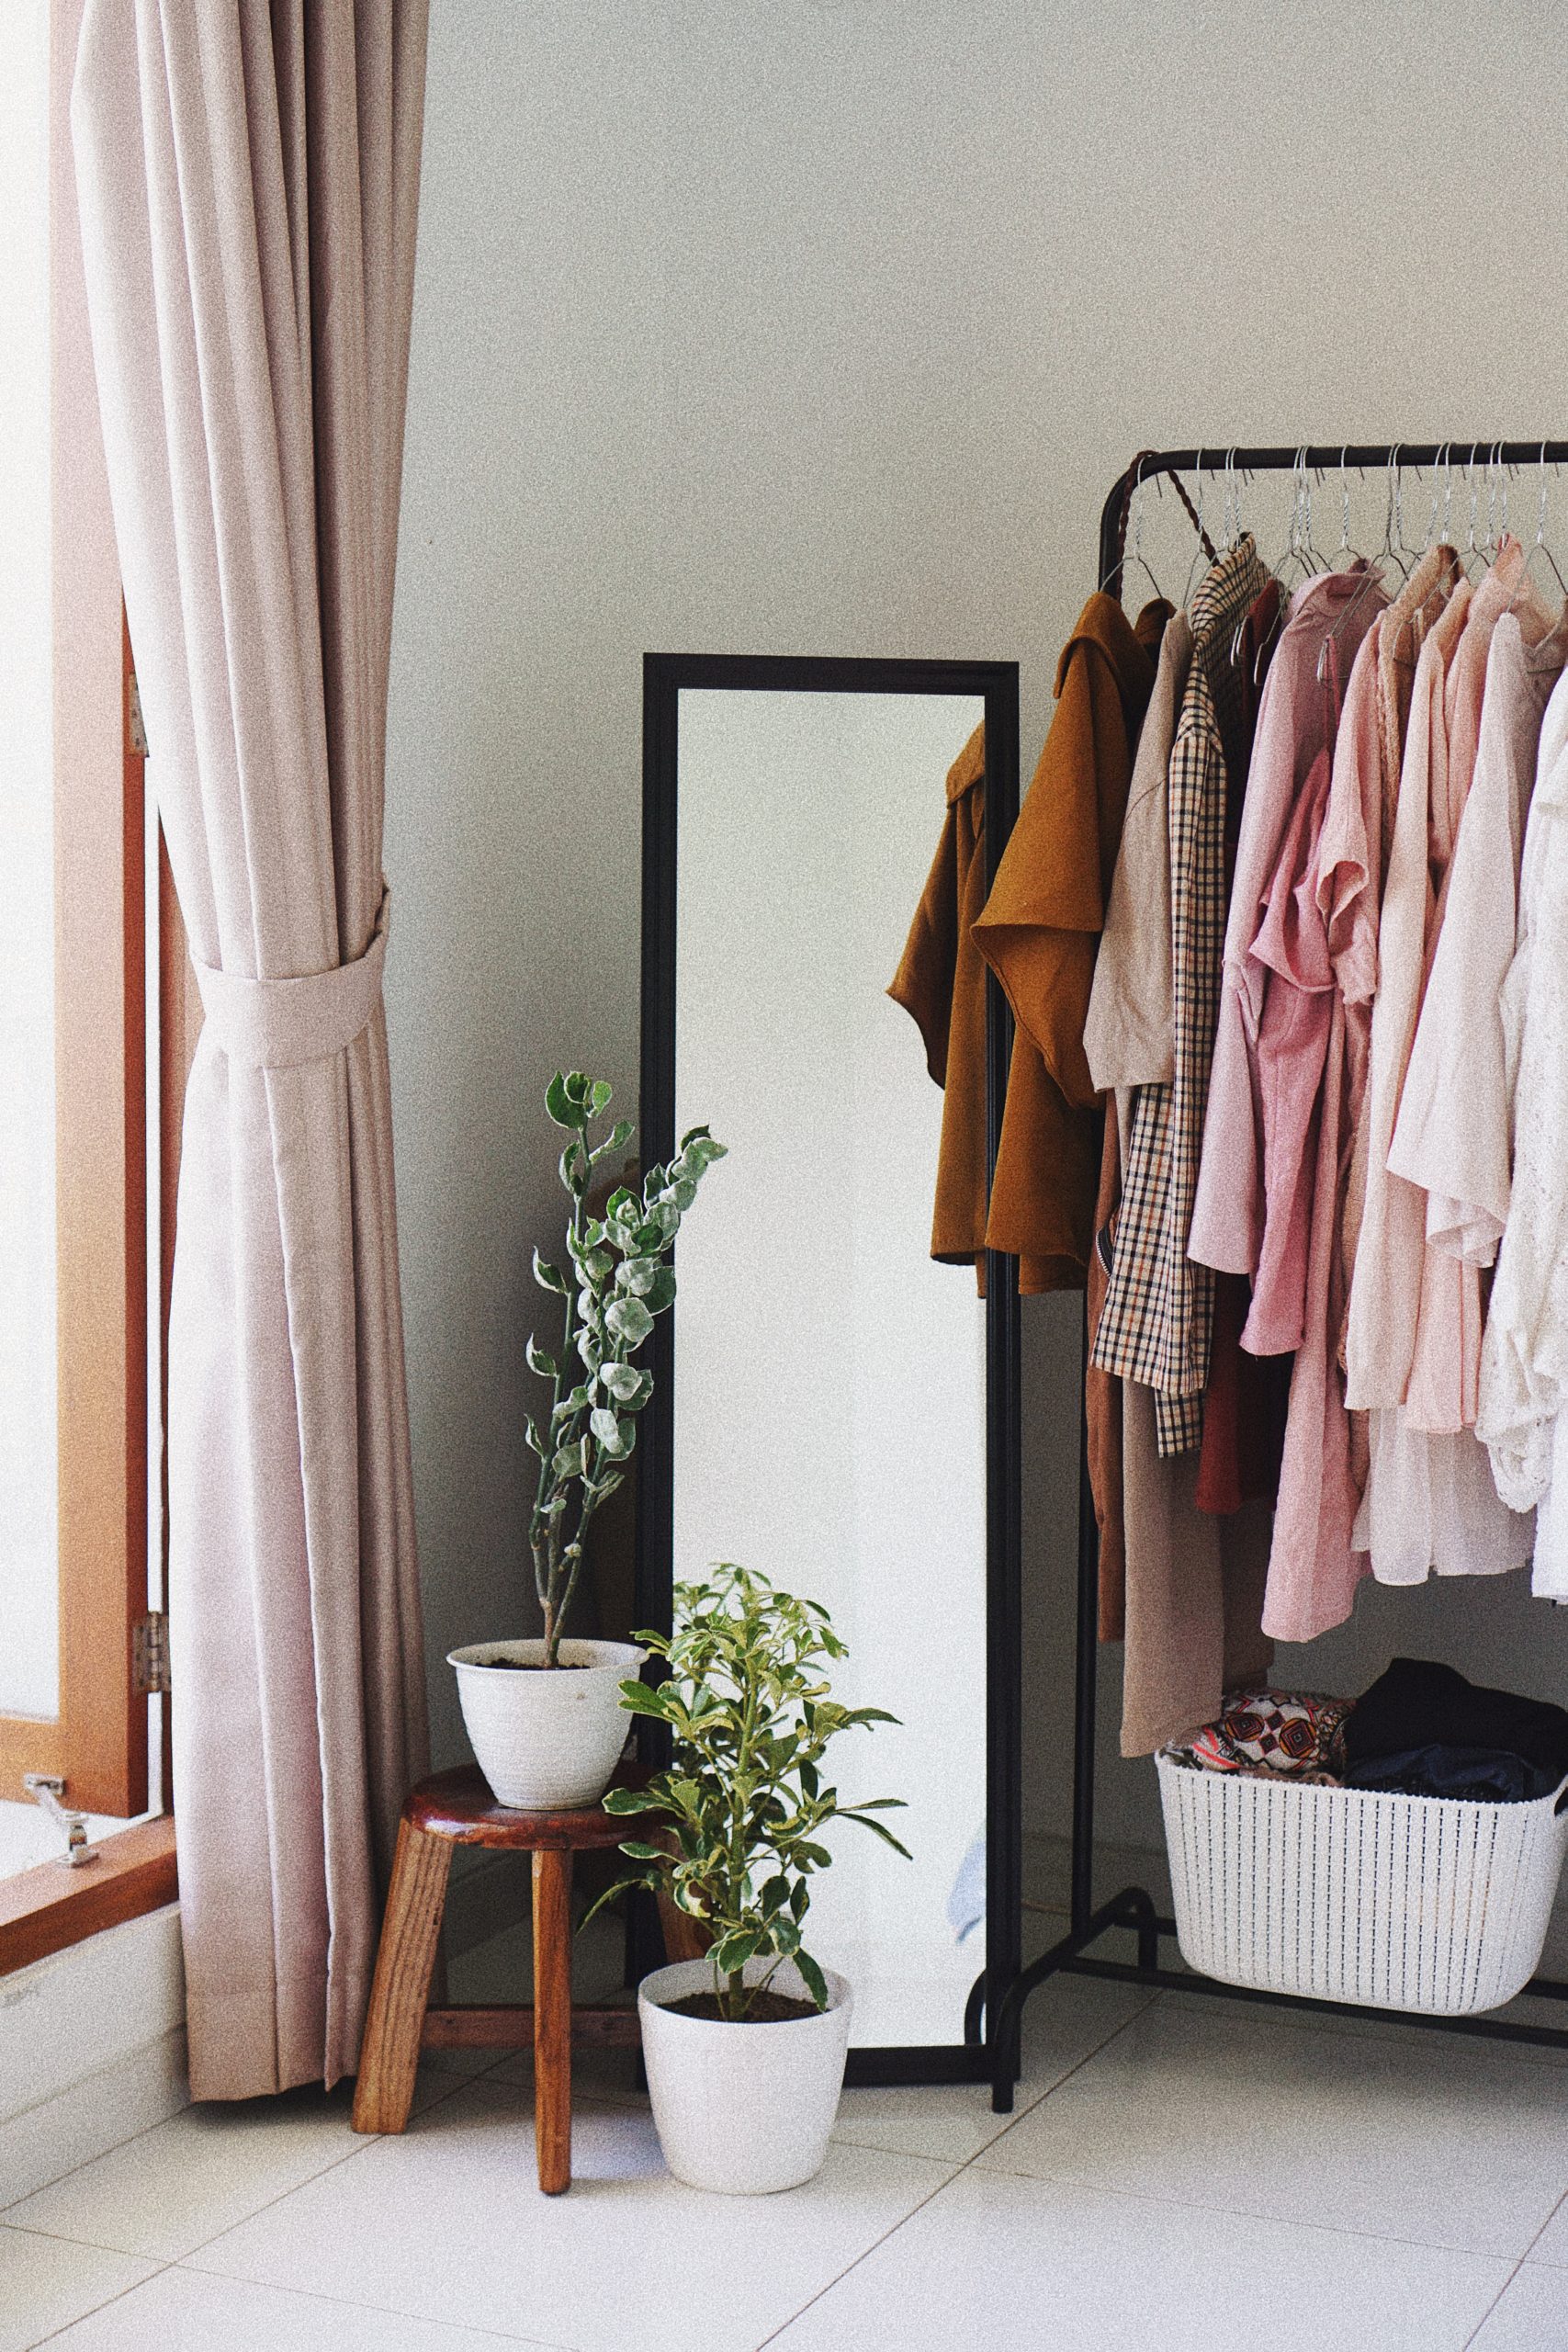 How to Build a Professional Wardrobe On a Budget!